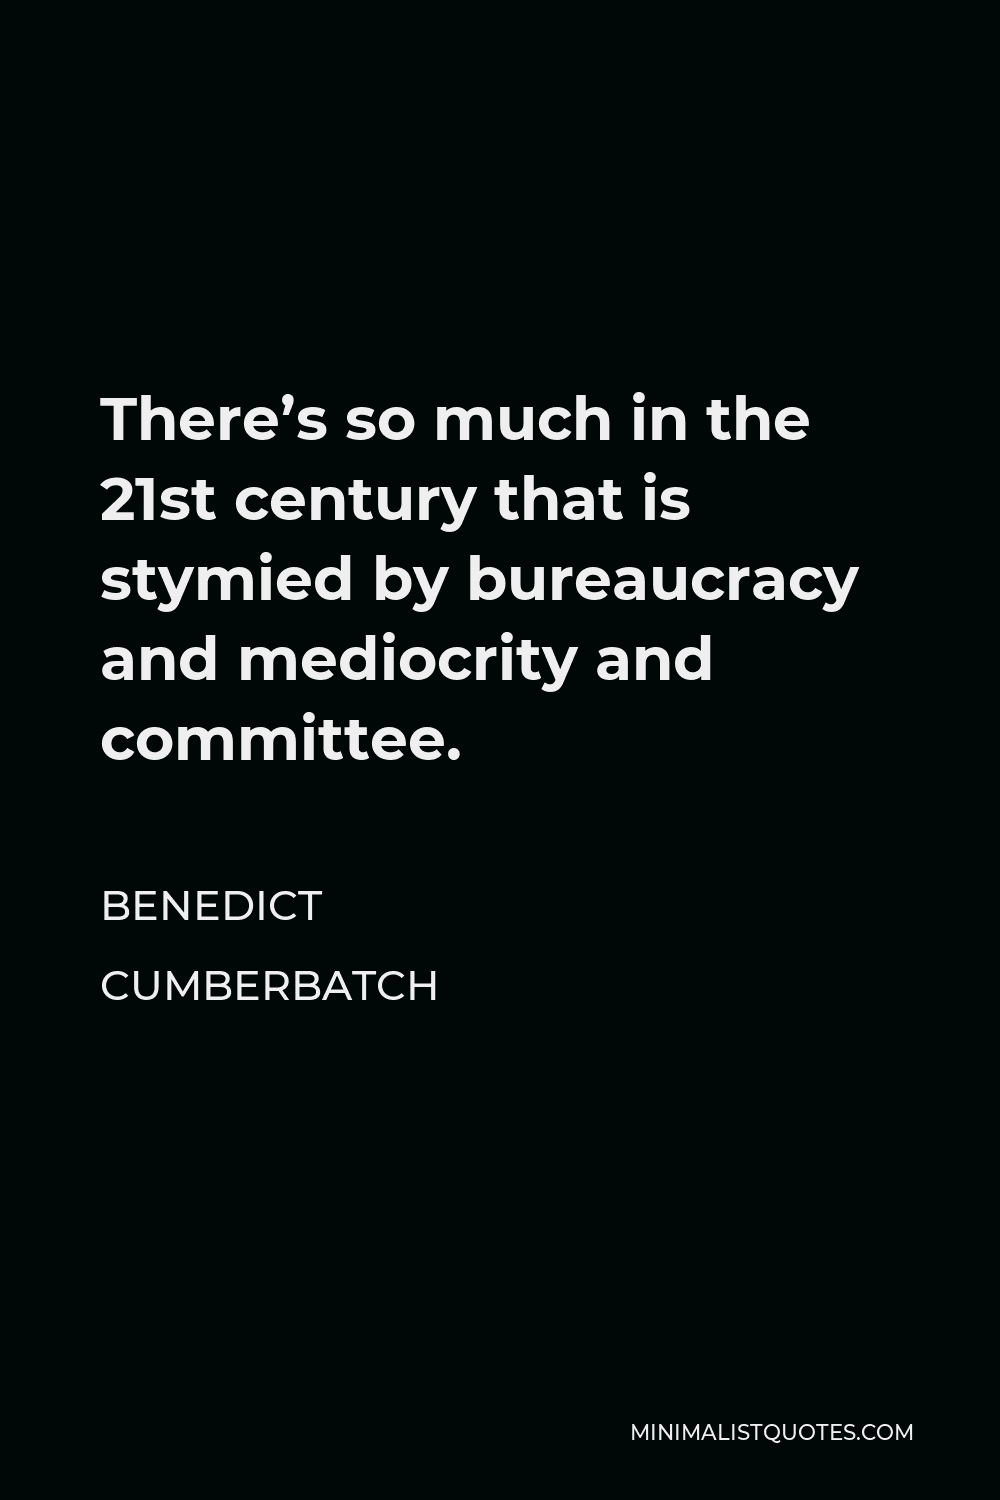 Benedict Cumberbatch Quote - There’s so much in the 21st century that is stymied by bureaucracy and mediocrity and committee.